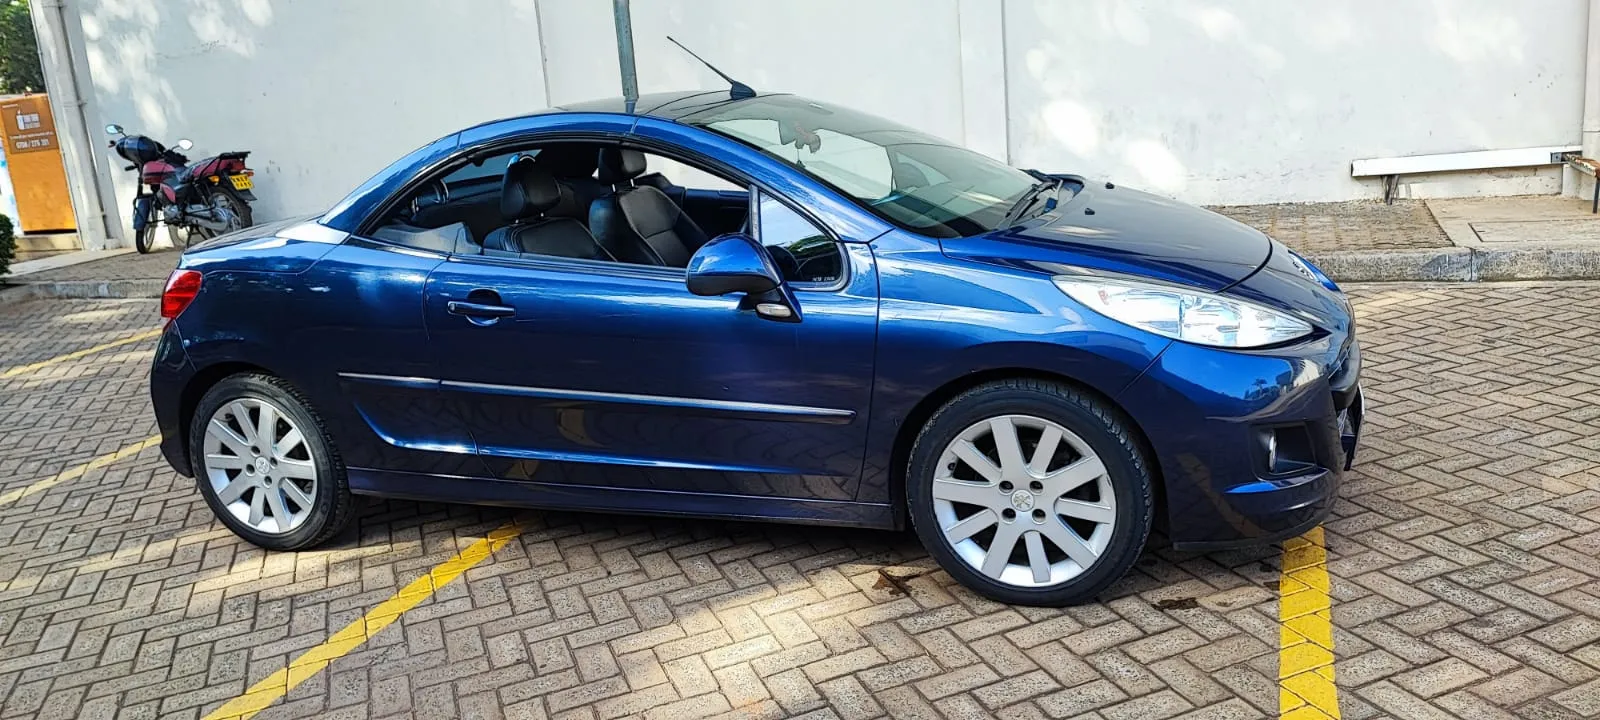 Peugeot 207 CONVERTIBLE You ONLY Pay 30% Deposit Trade in Ok QUICK SALE